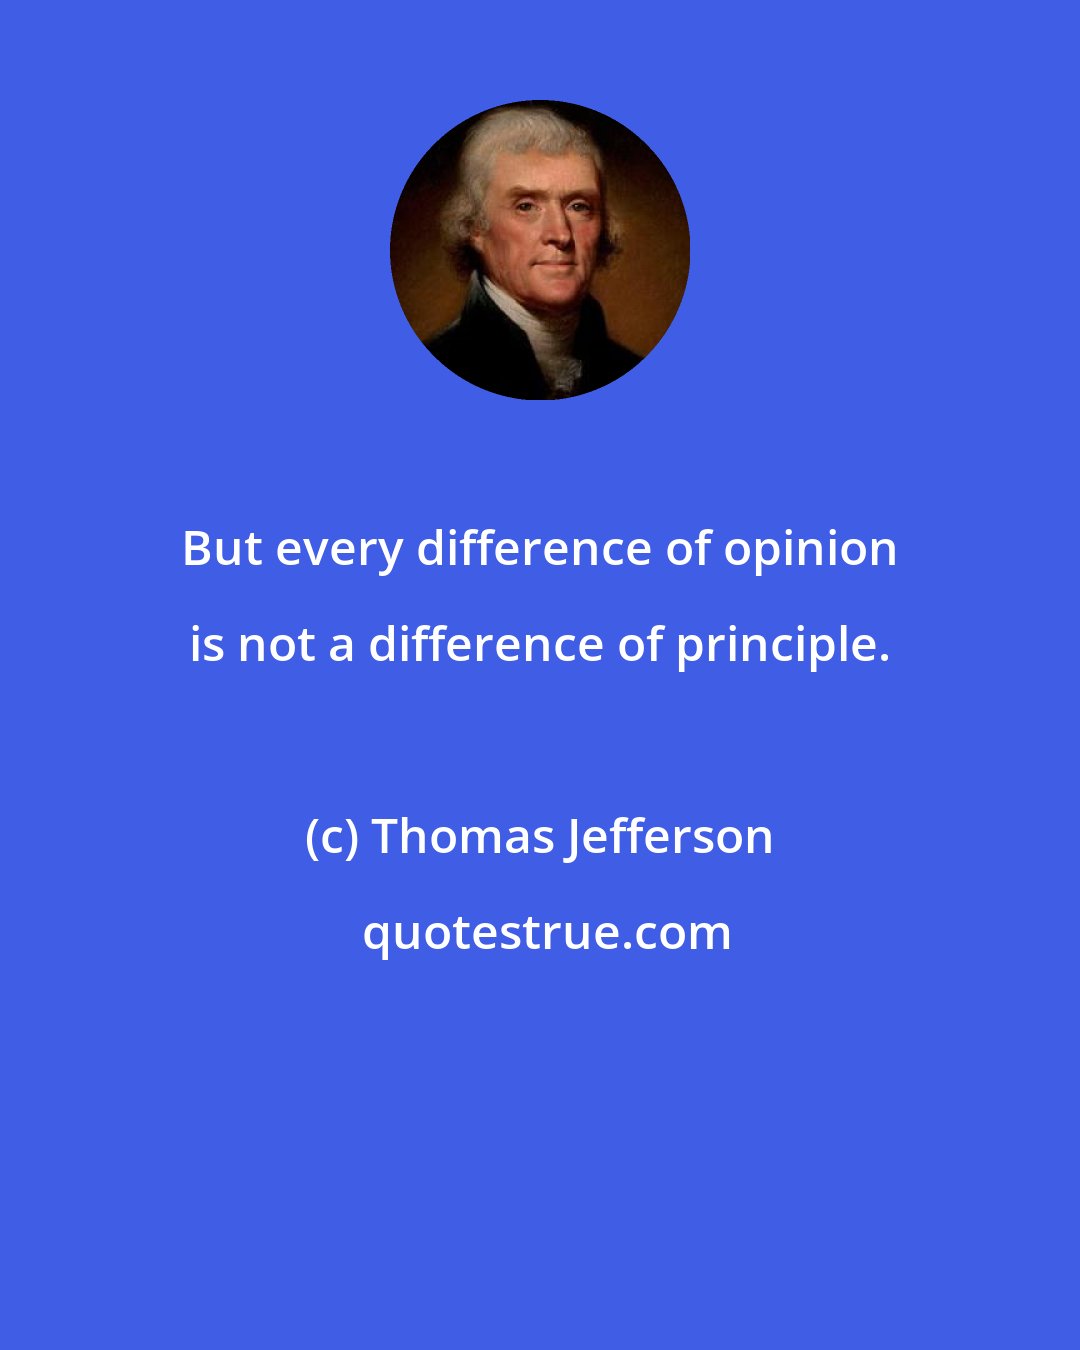 Thomas Jefferson: But every difference of opinion is not a difference of principle.